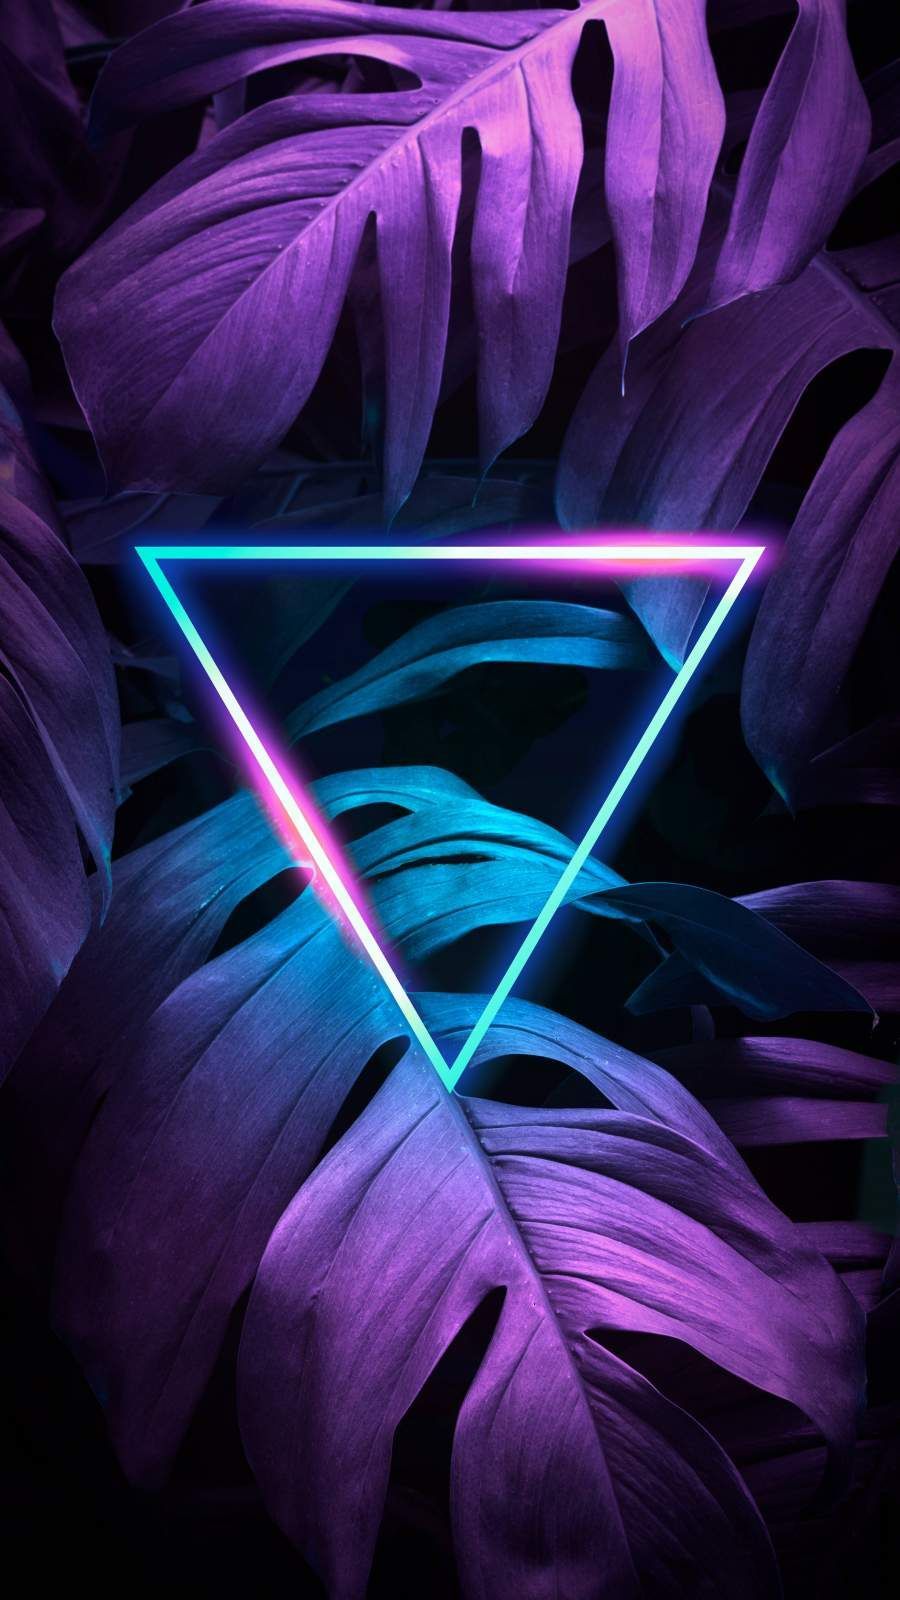 Neon Triangle iPhone Wallpaper in 2020